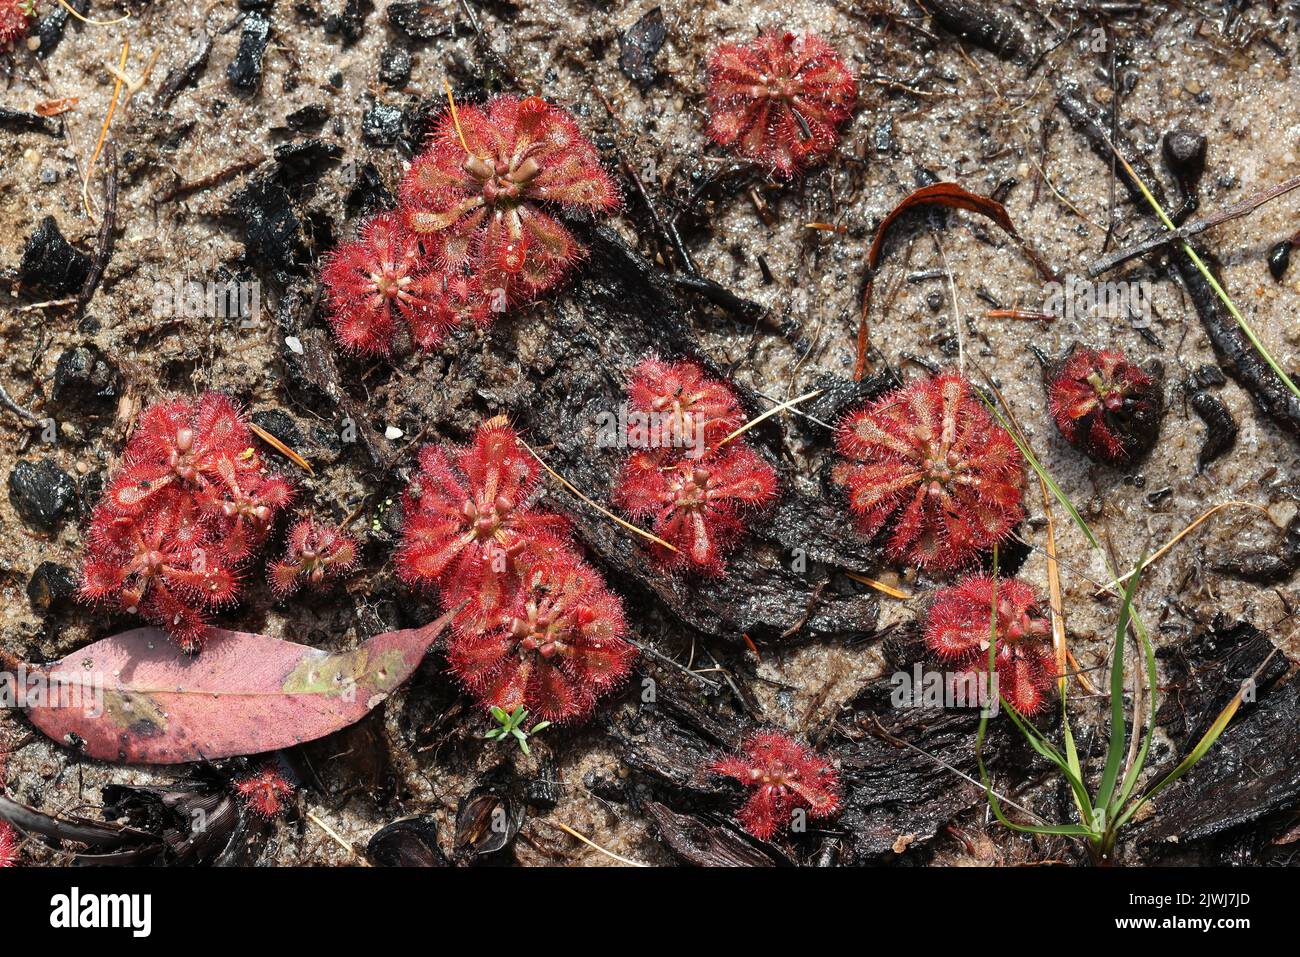 Spoon-leaf Sundews in boggy damp environment Stock Photo